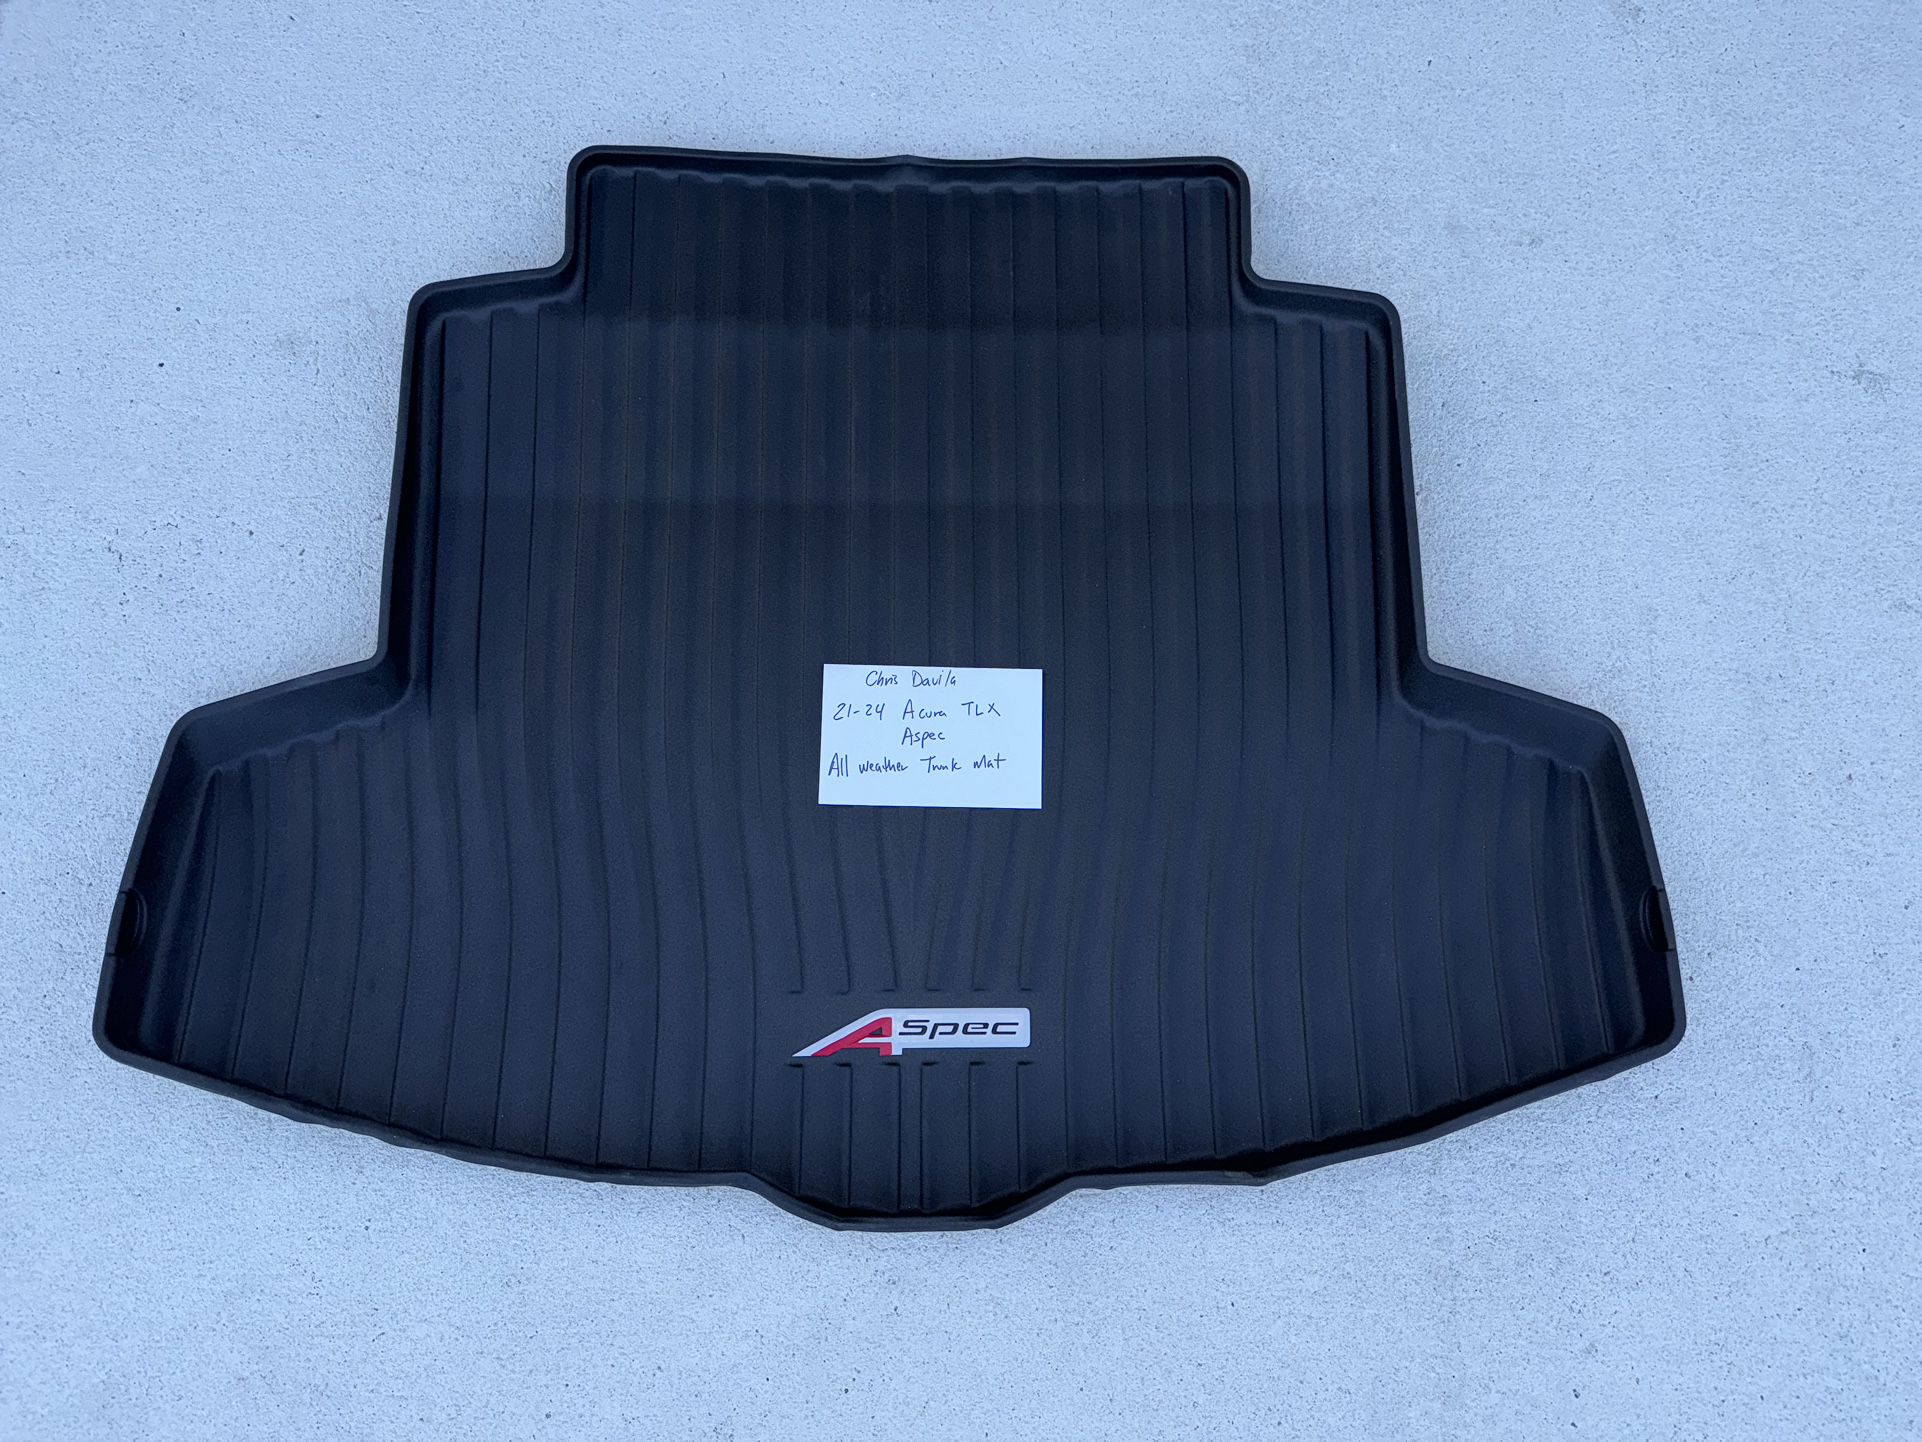 21-24 Acura TLX  Aspec All Weather Trunk May